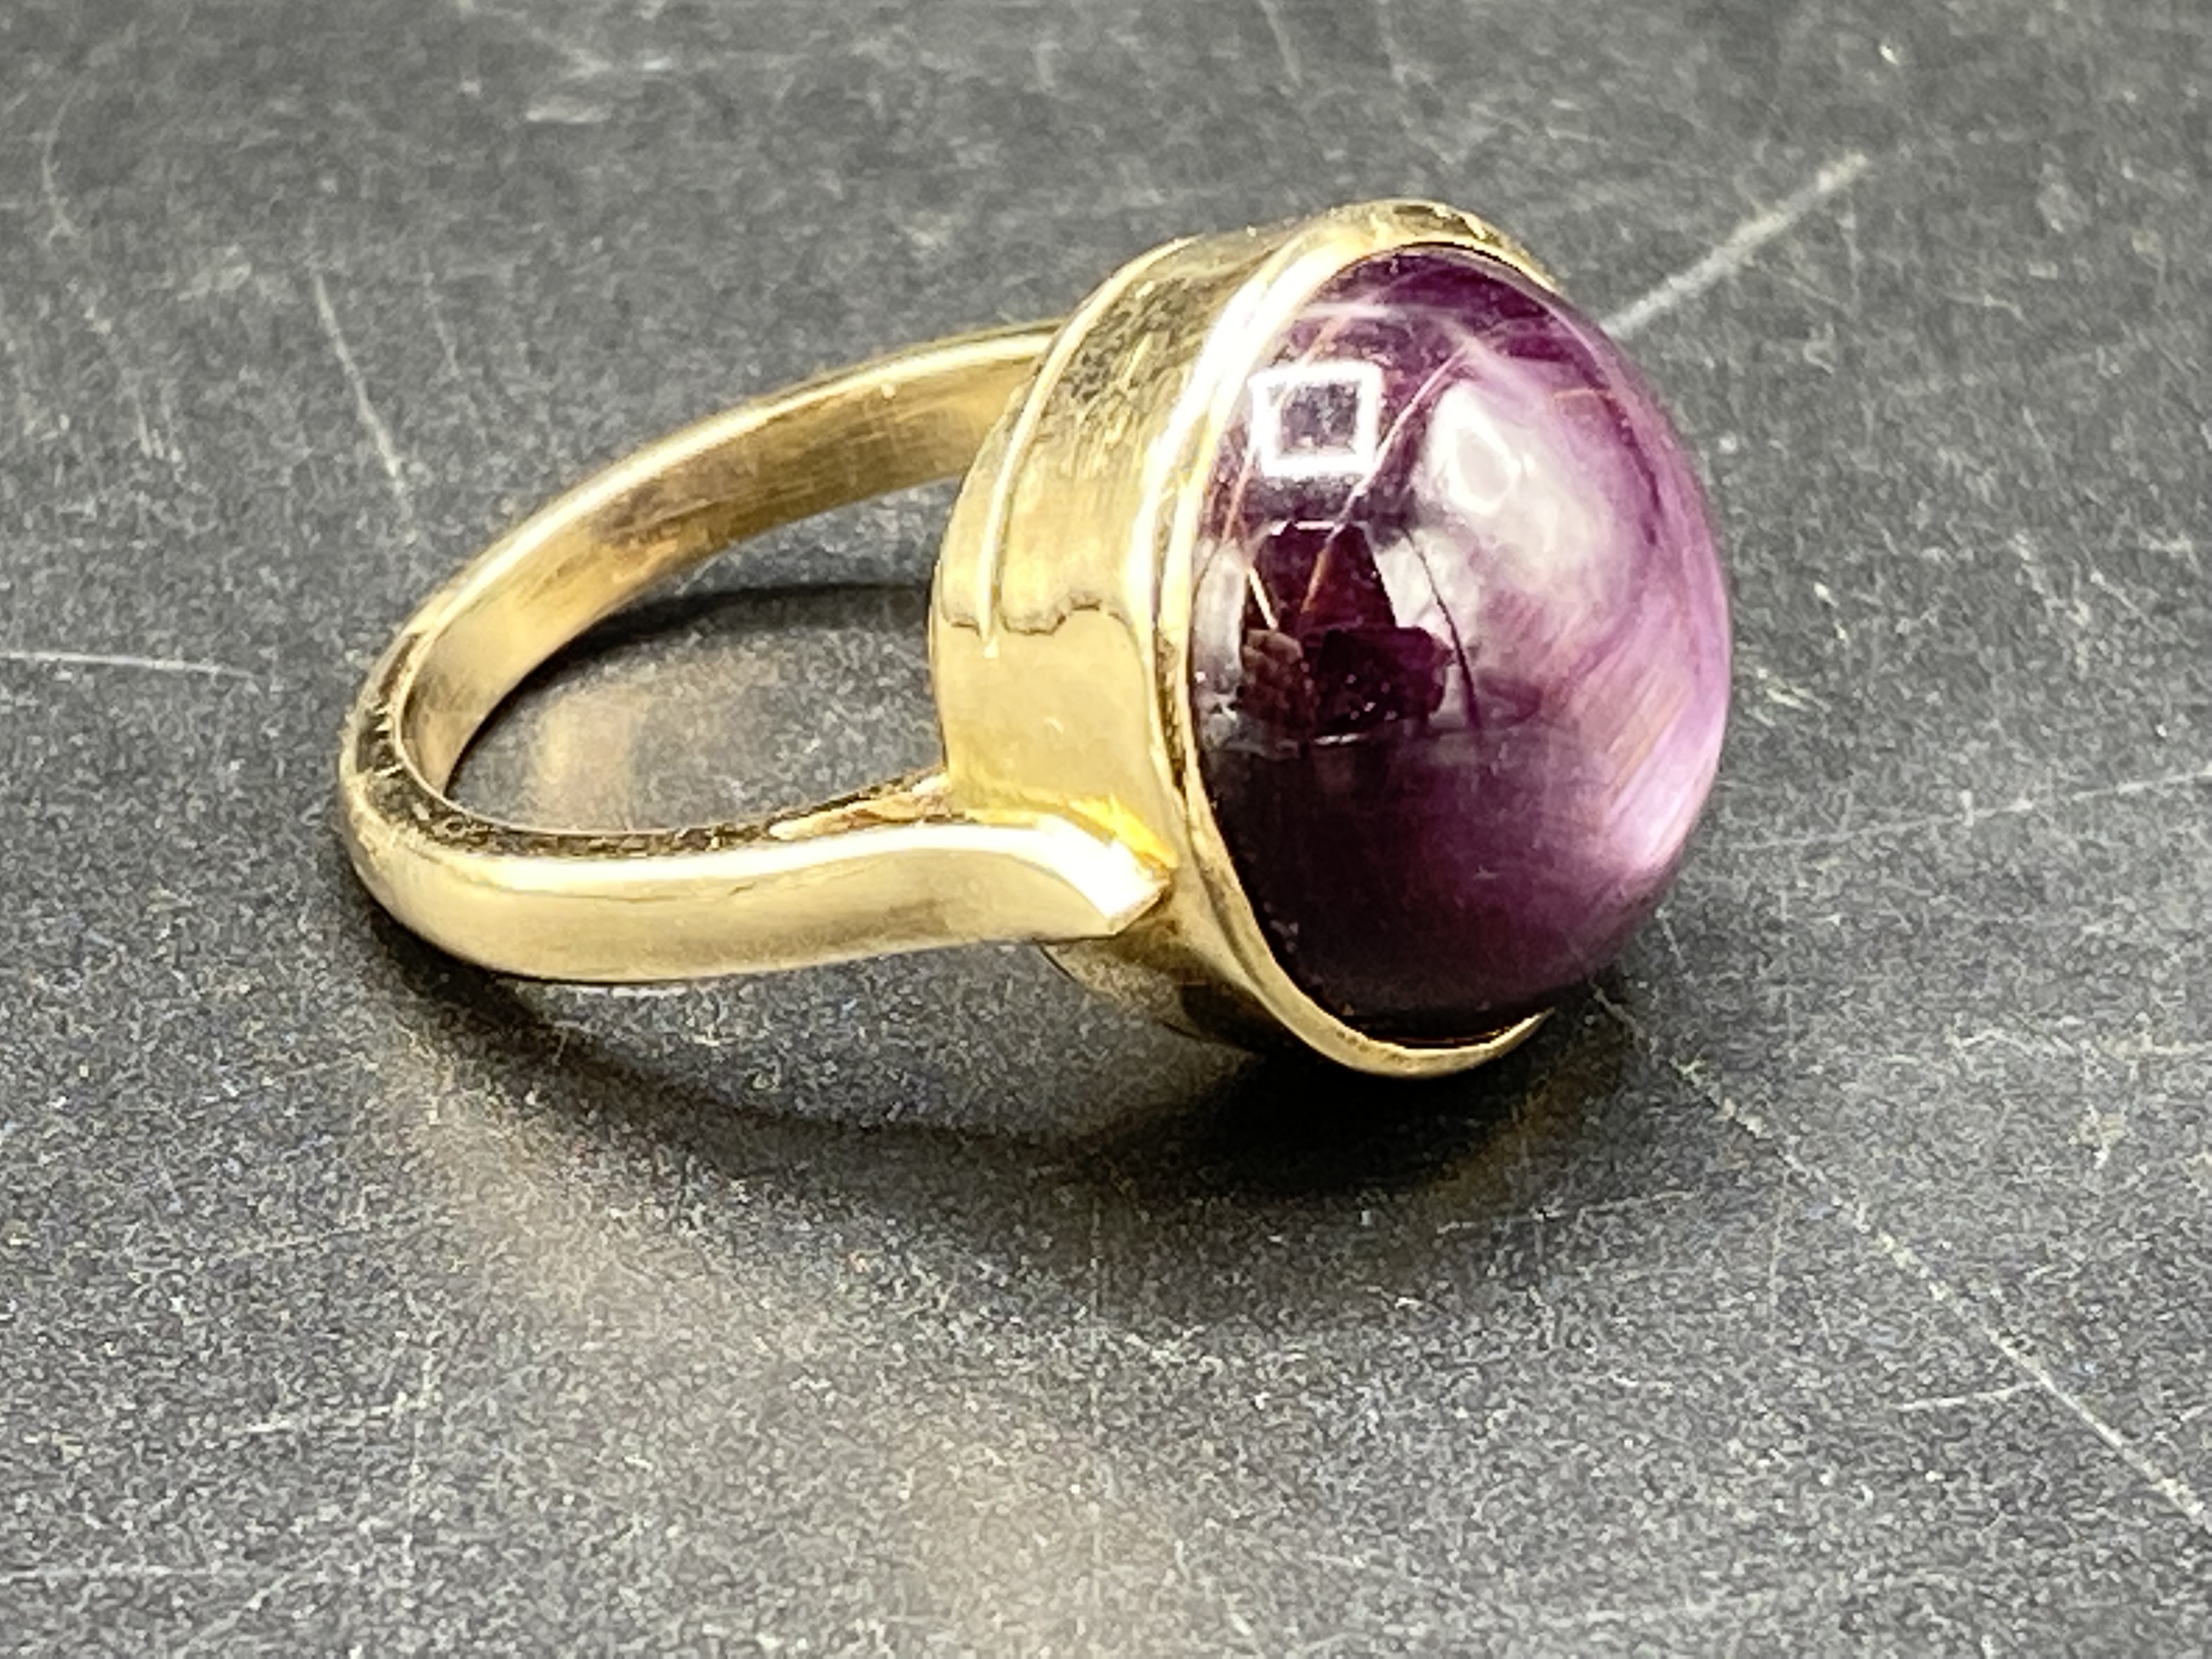 14ct gold ring set with a star sapphire - Image 3 of 6